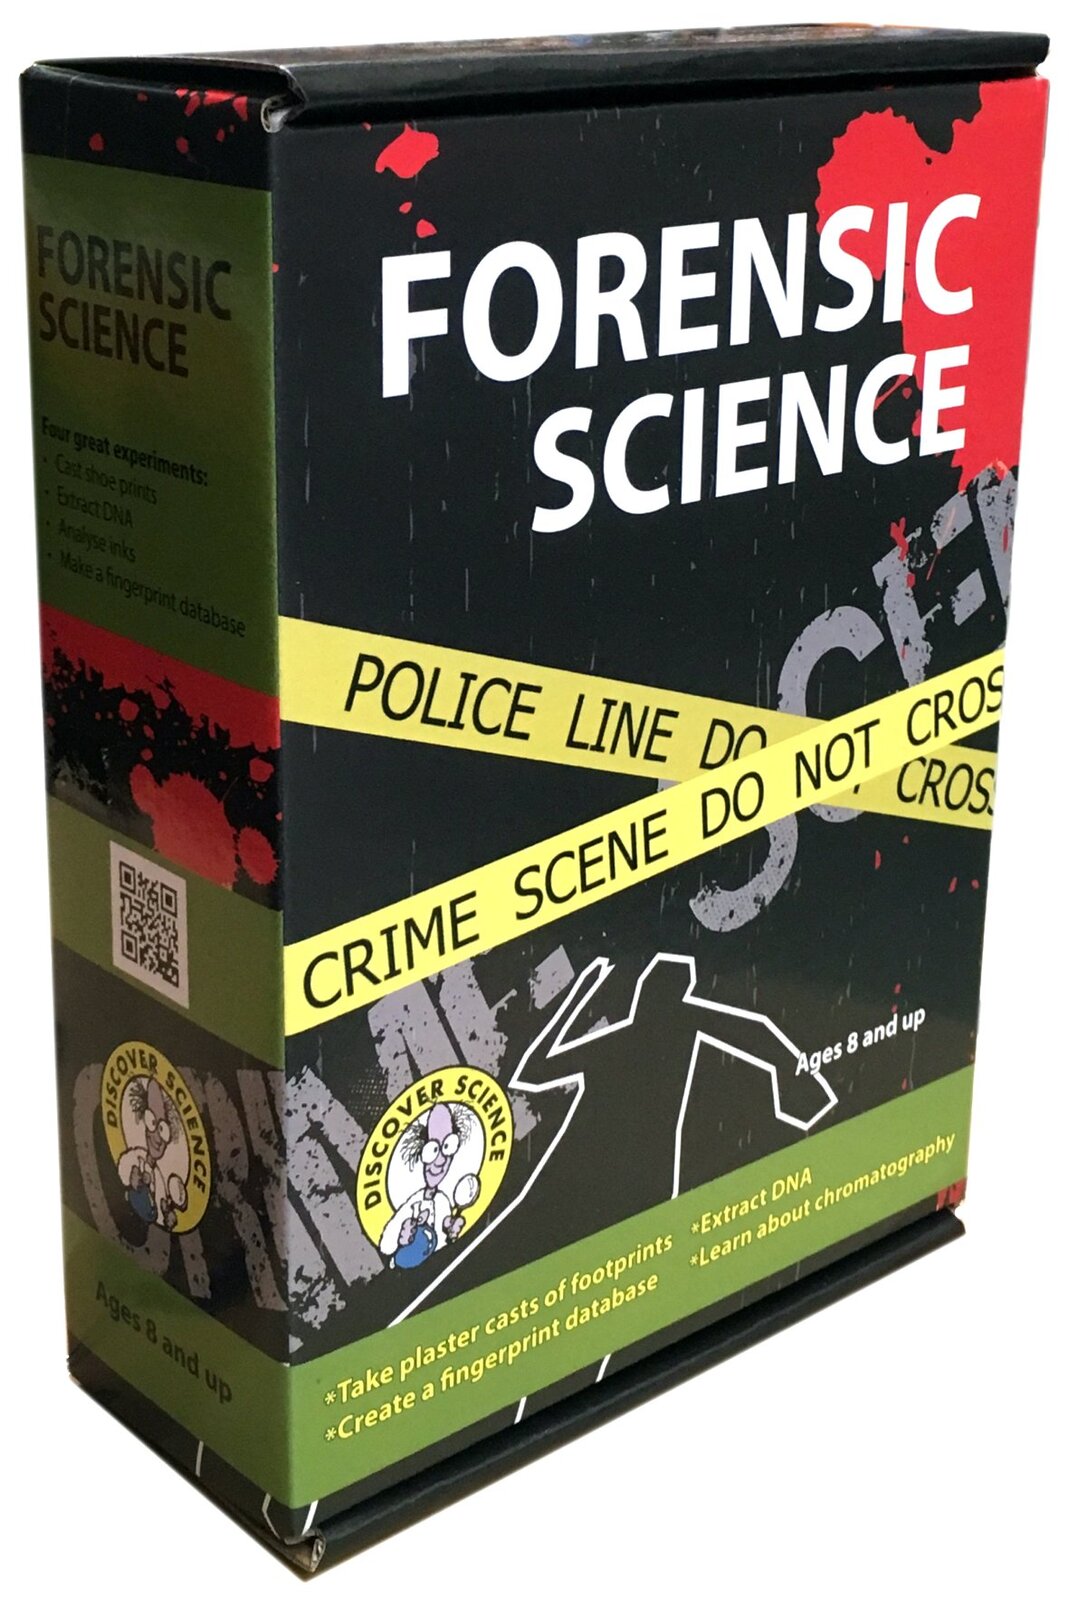 Forensic Science image